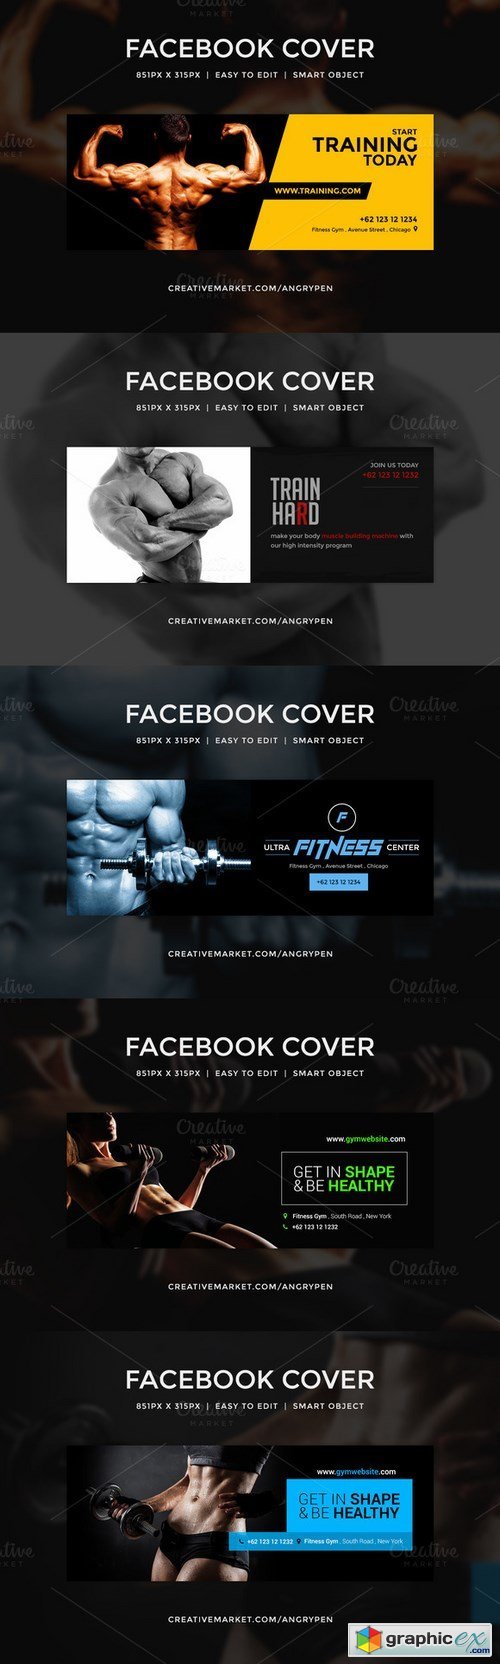 Gym Workout facebook covers